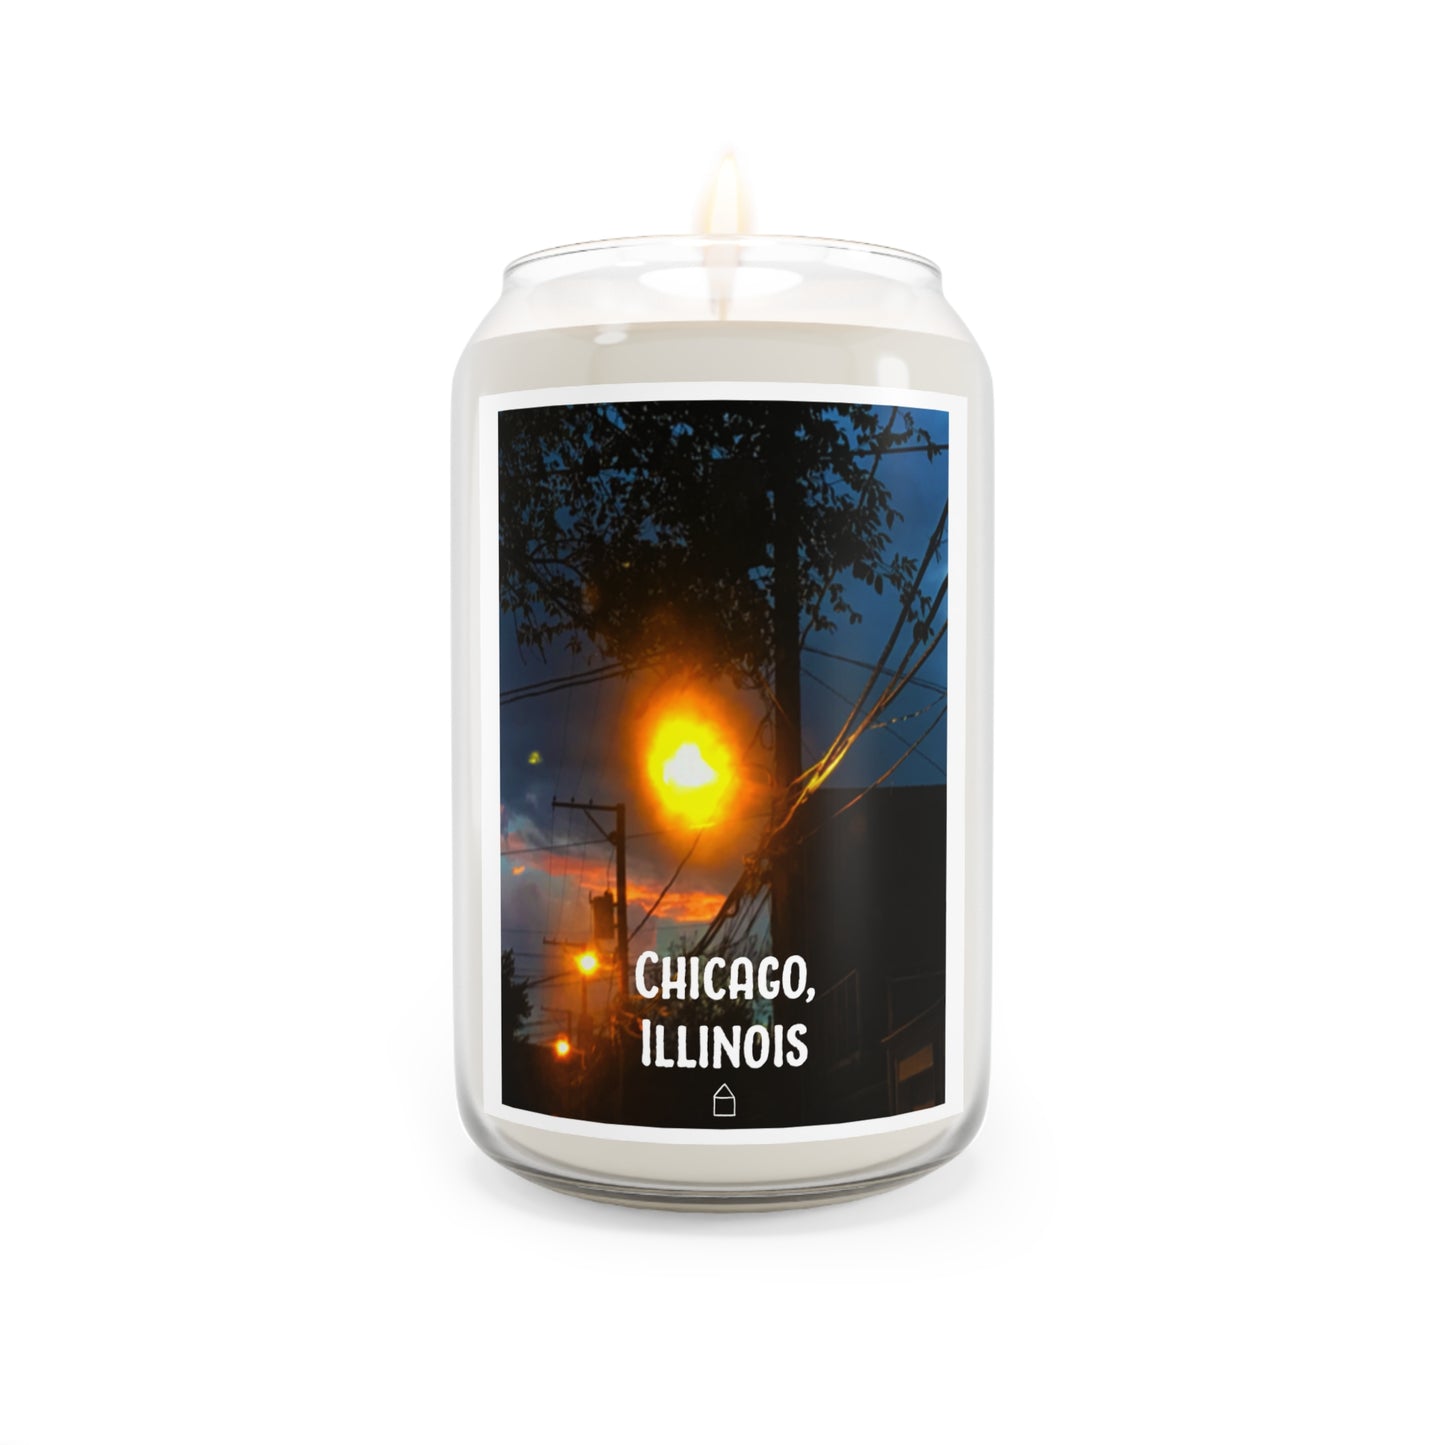 Chicago, Illinois (#002) - Home Town Candles, 13.75oz